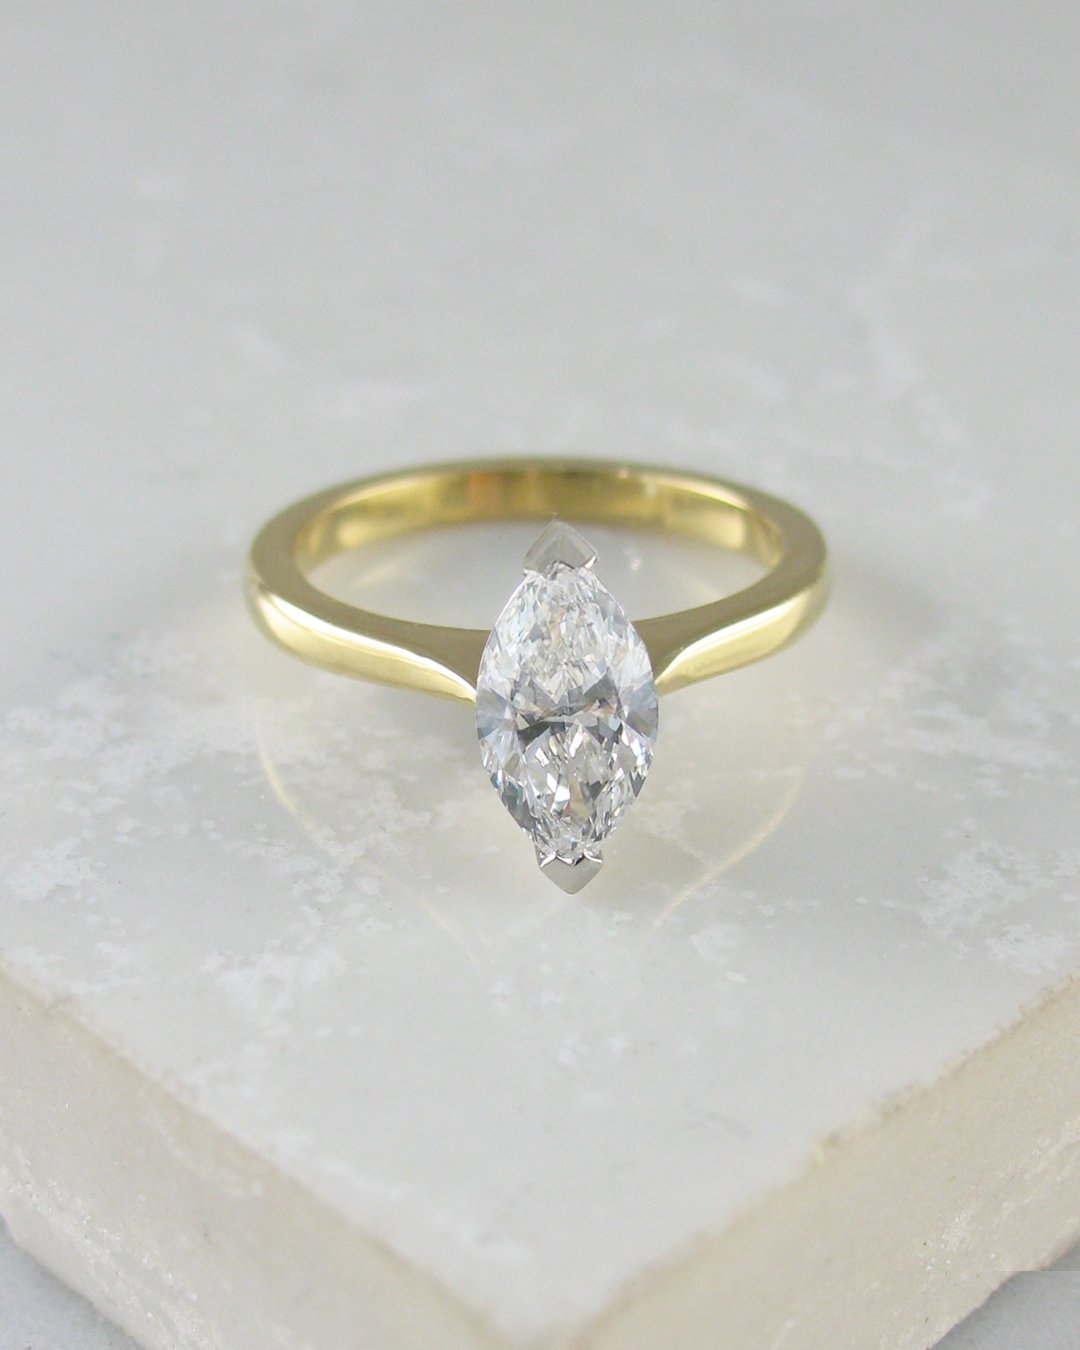 A solitaire marquise diamond engagement ring